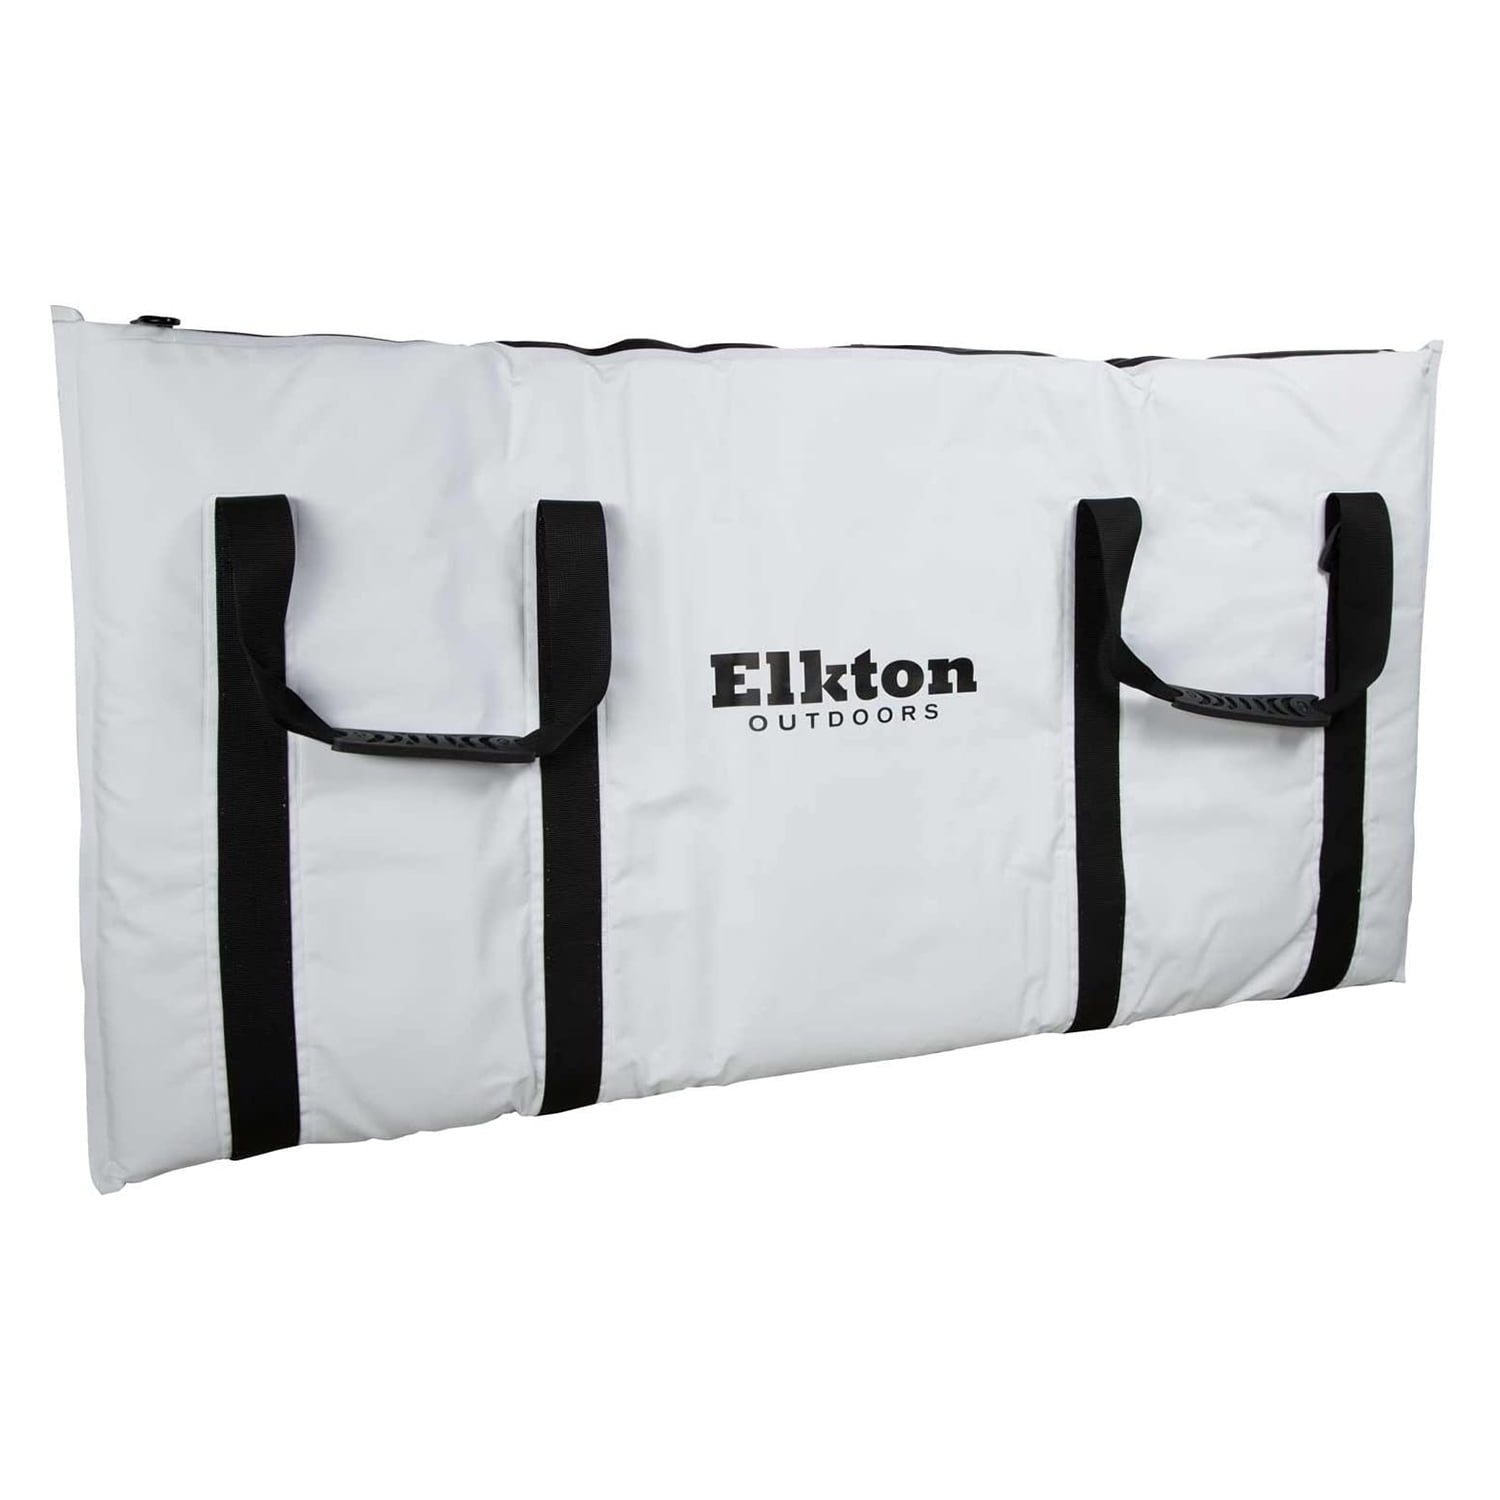 Elkton Outdoors Insulated Fish Cooler Bag Leakproof Fish Kill Bag 40x20in  and